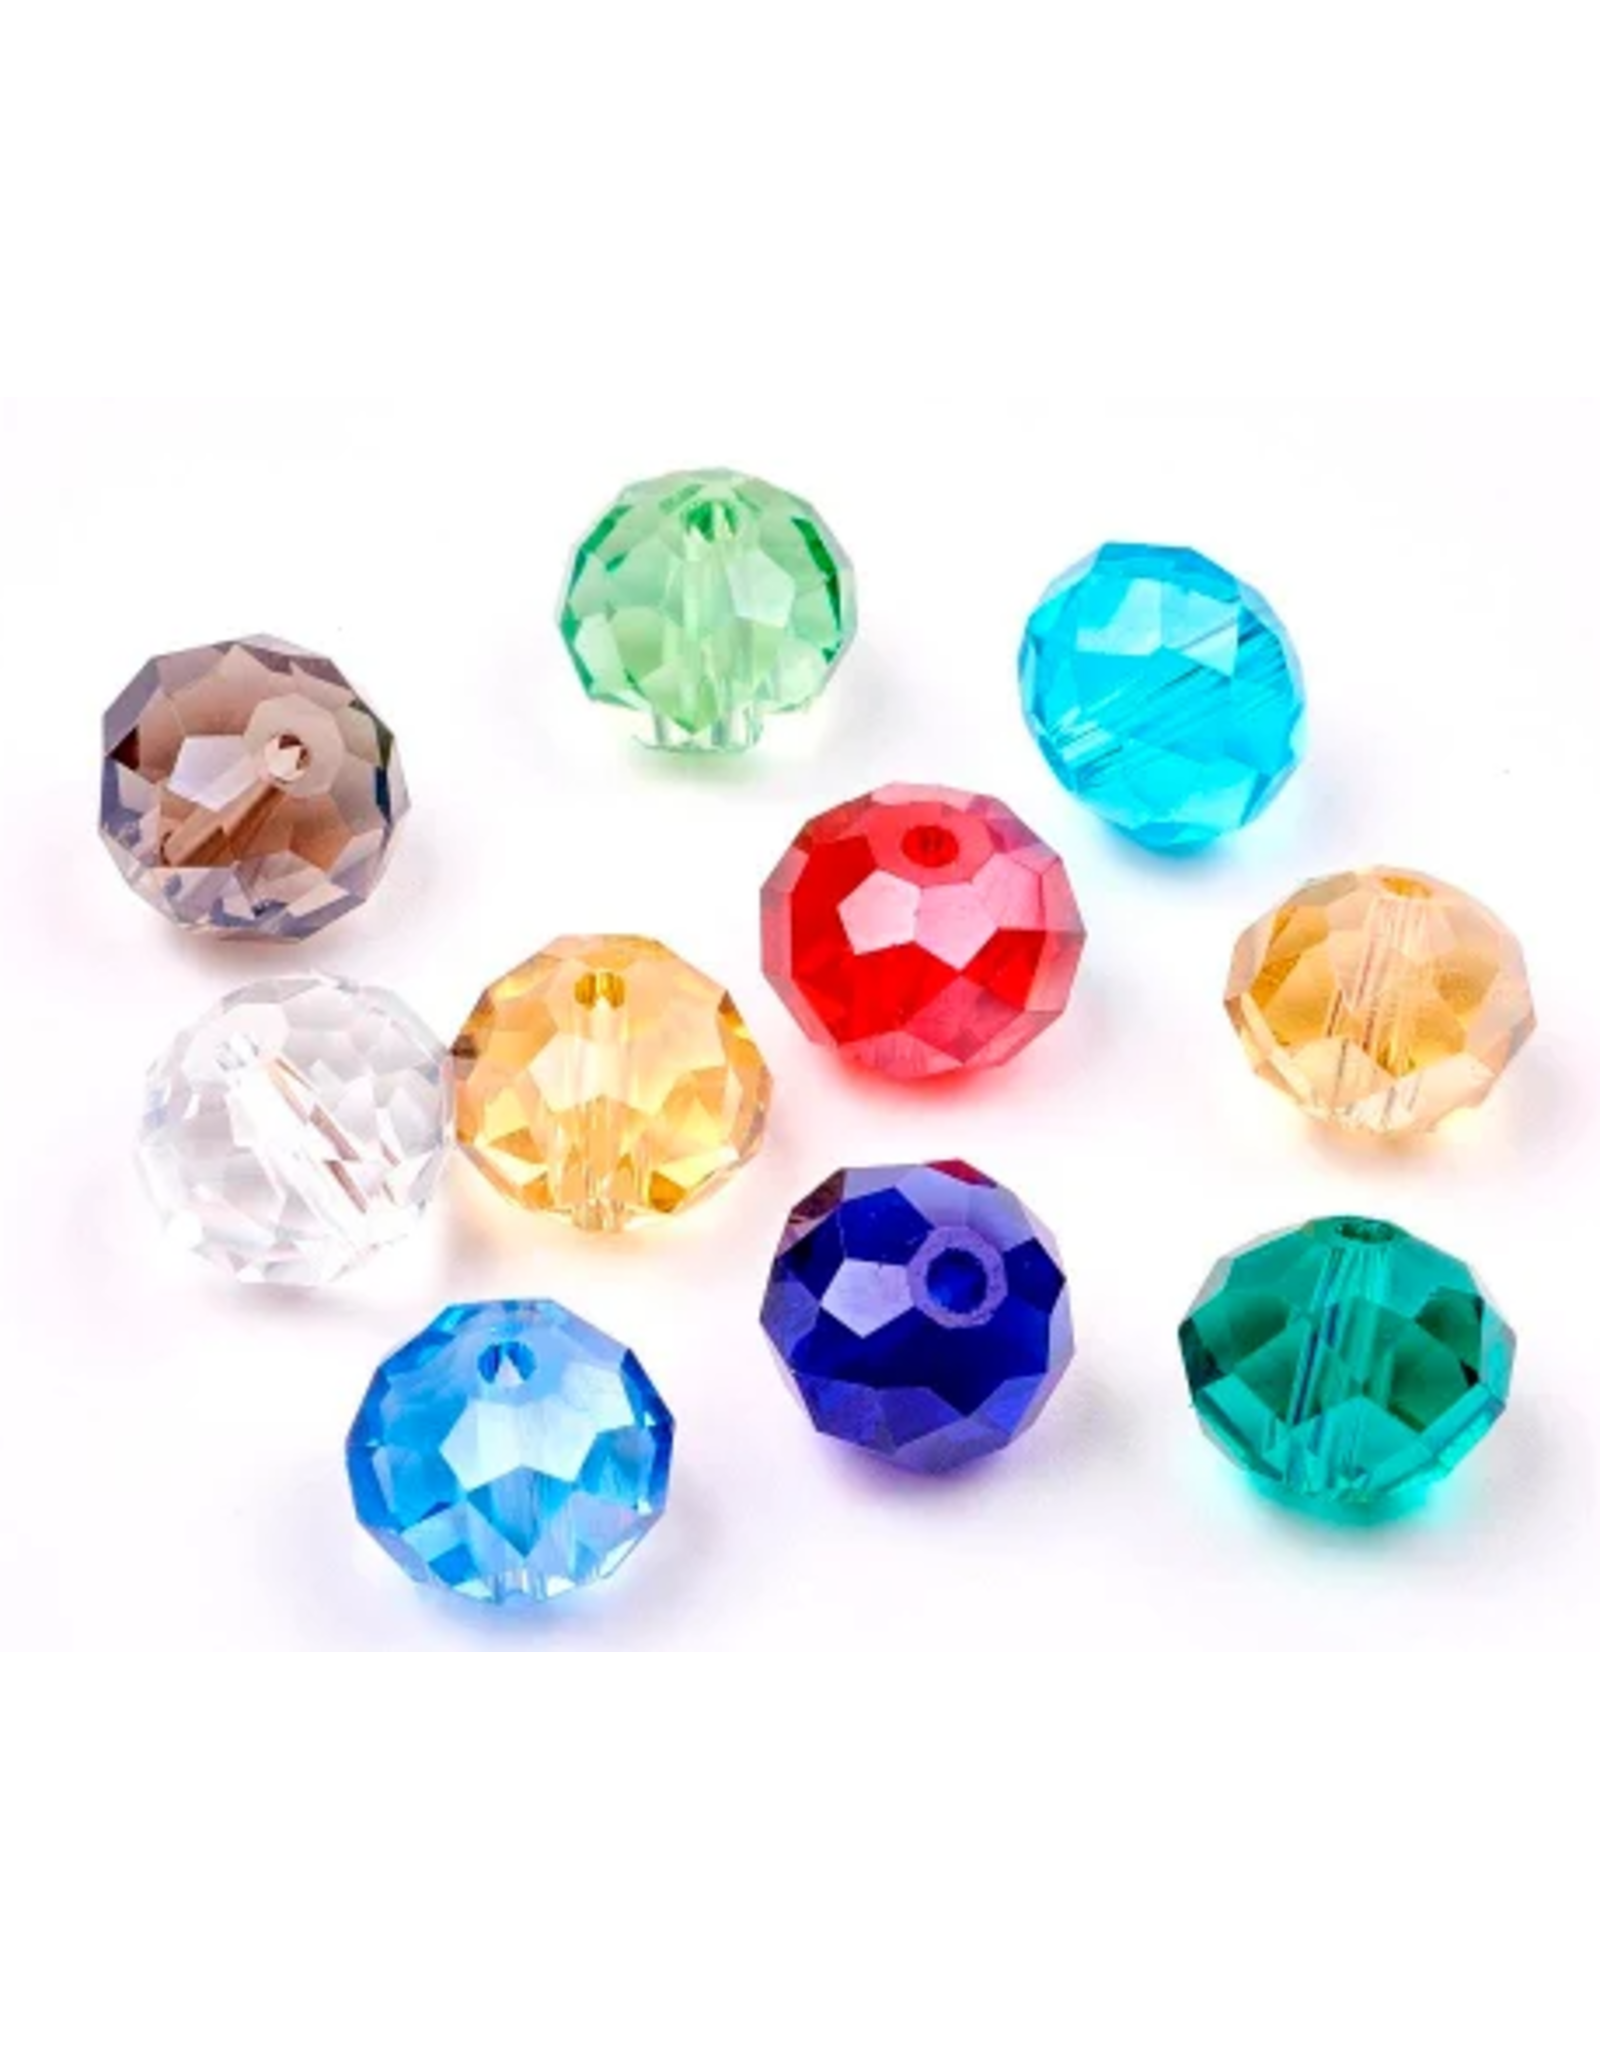 Beadery FACETED BEADS: 6MM ASSORTED  1080 PACK